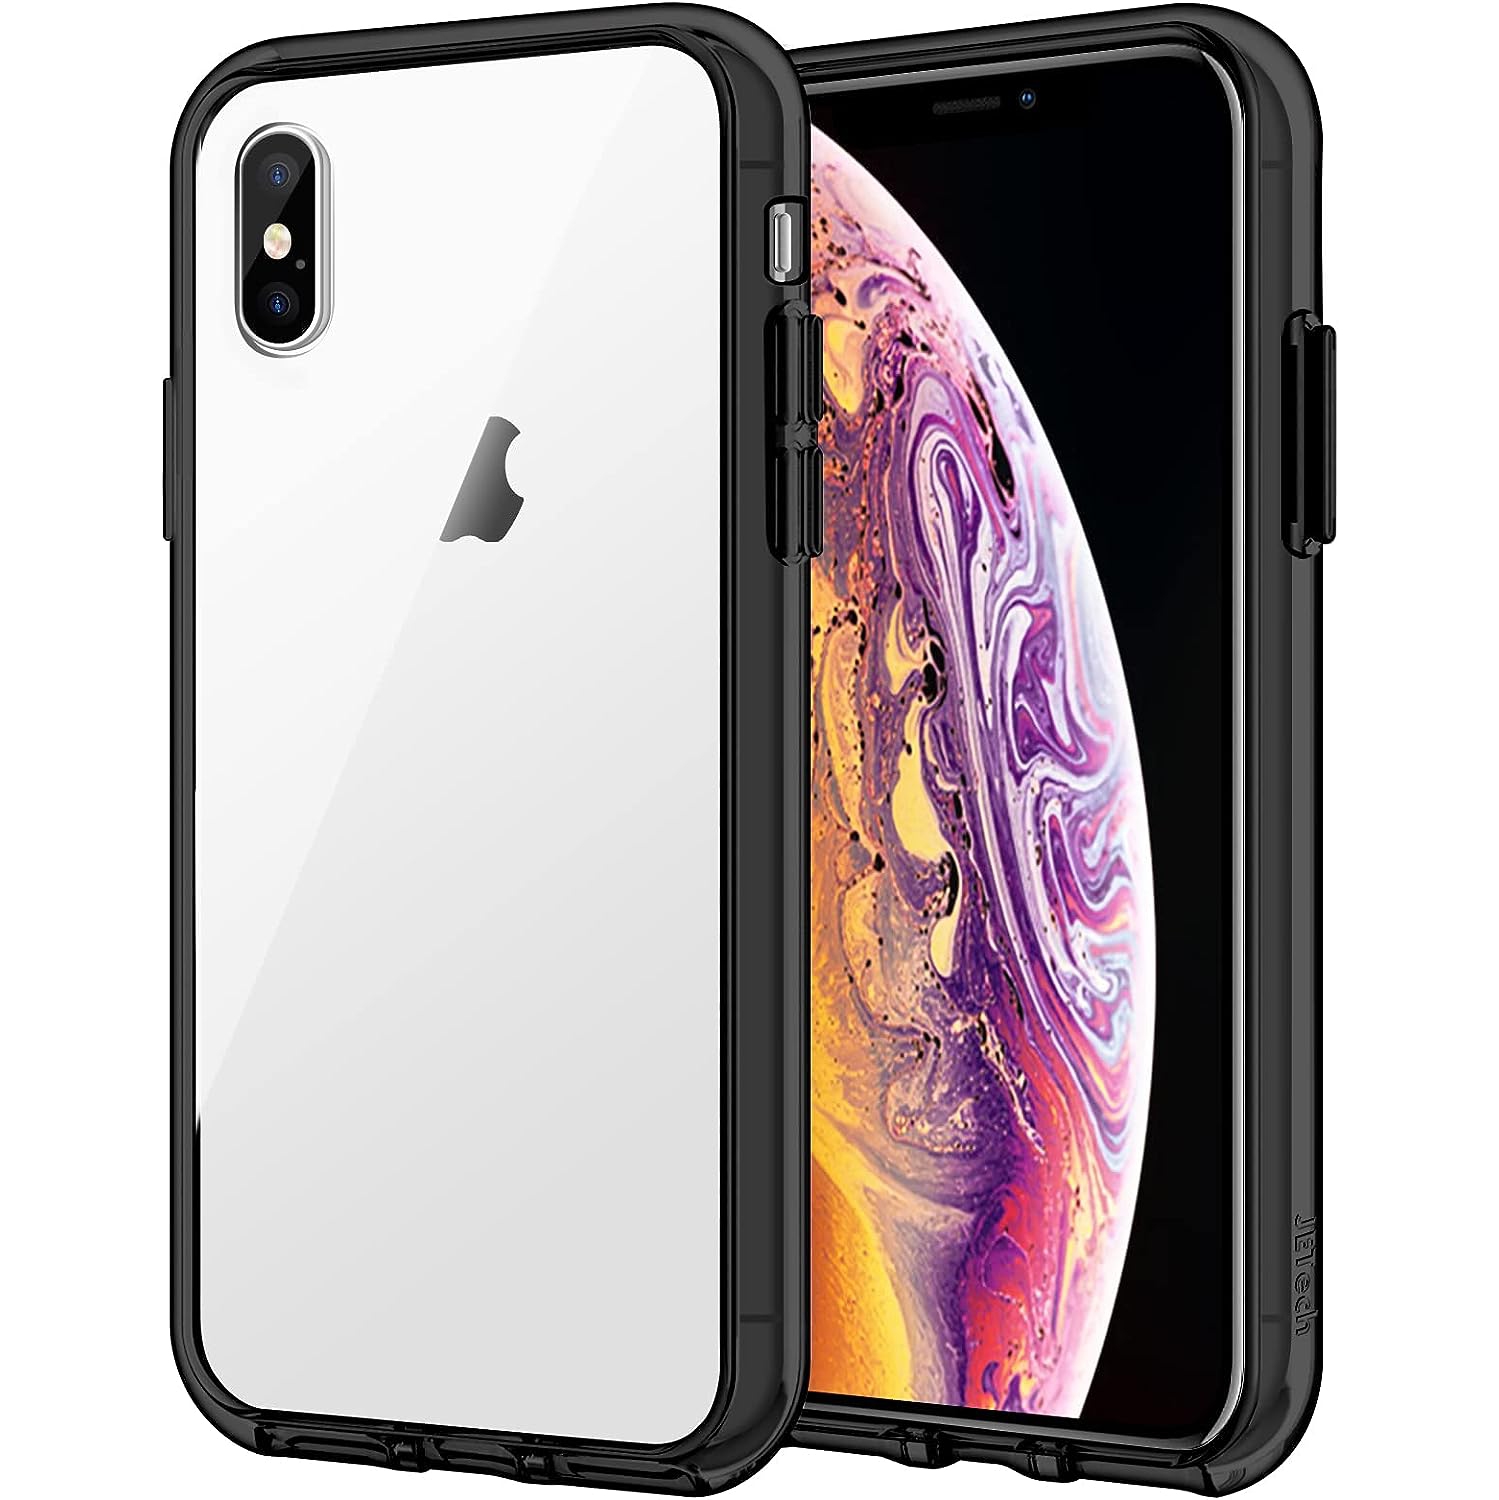 Case for iPhone Xs and iPhone X, Shock-Absorption Bumper Cover, Anti-Scratch Clear Back, Black